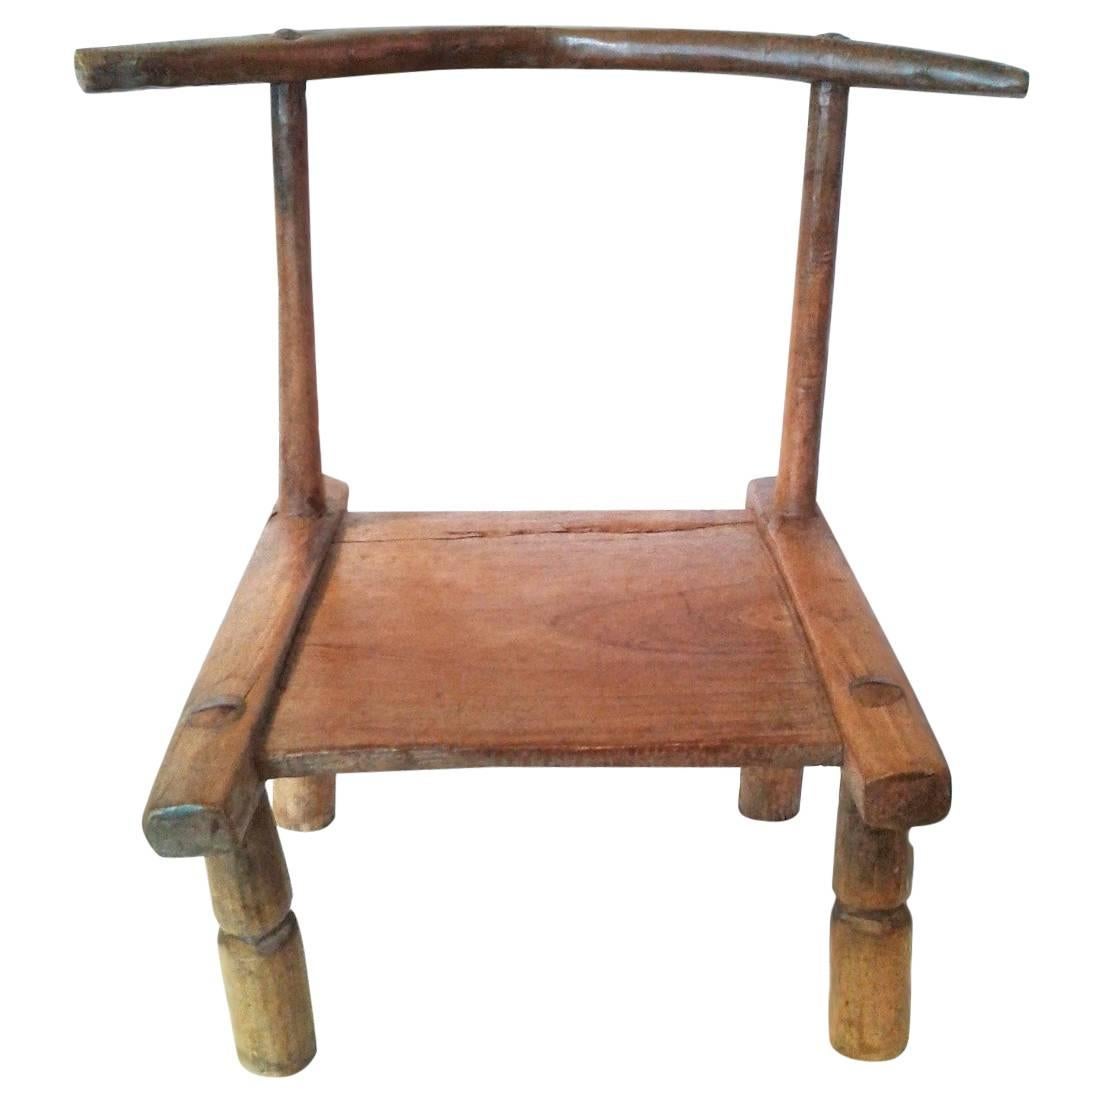 Baule Chair from Ivory Coast